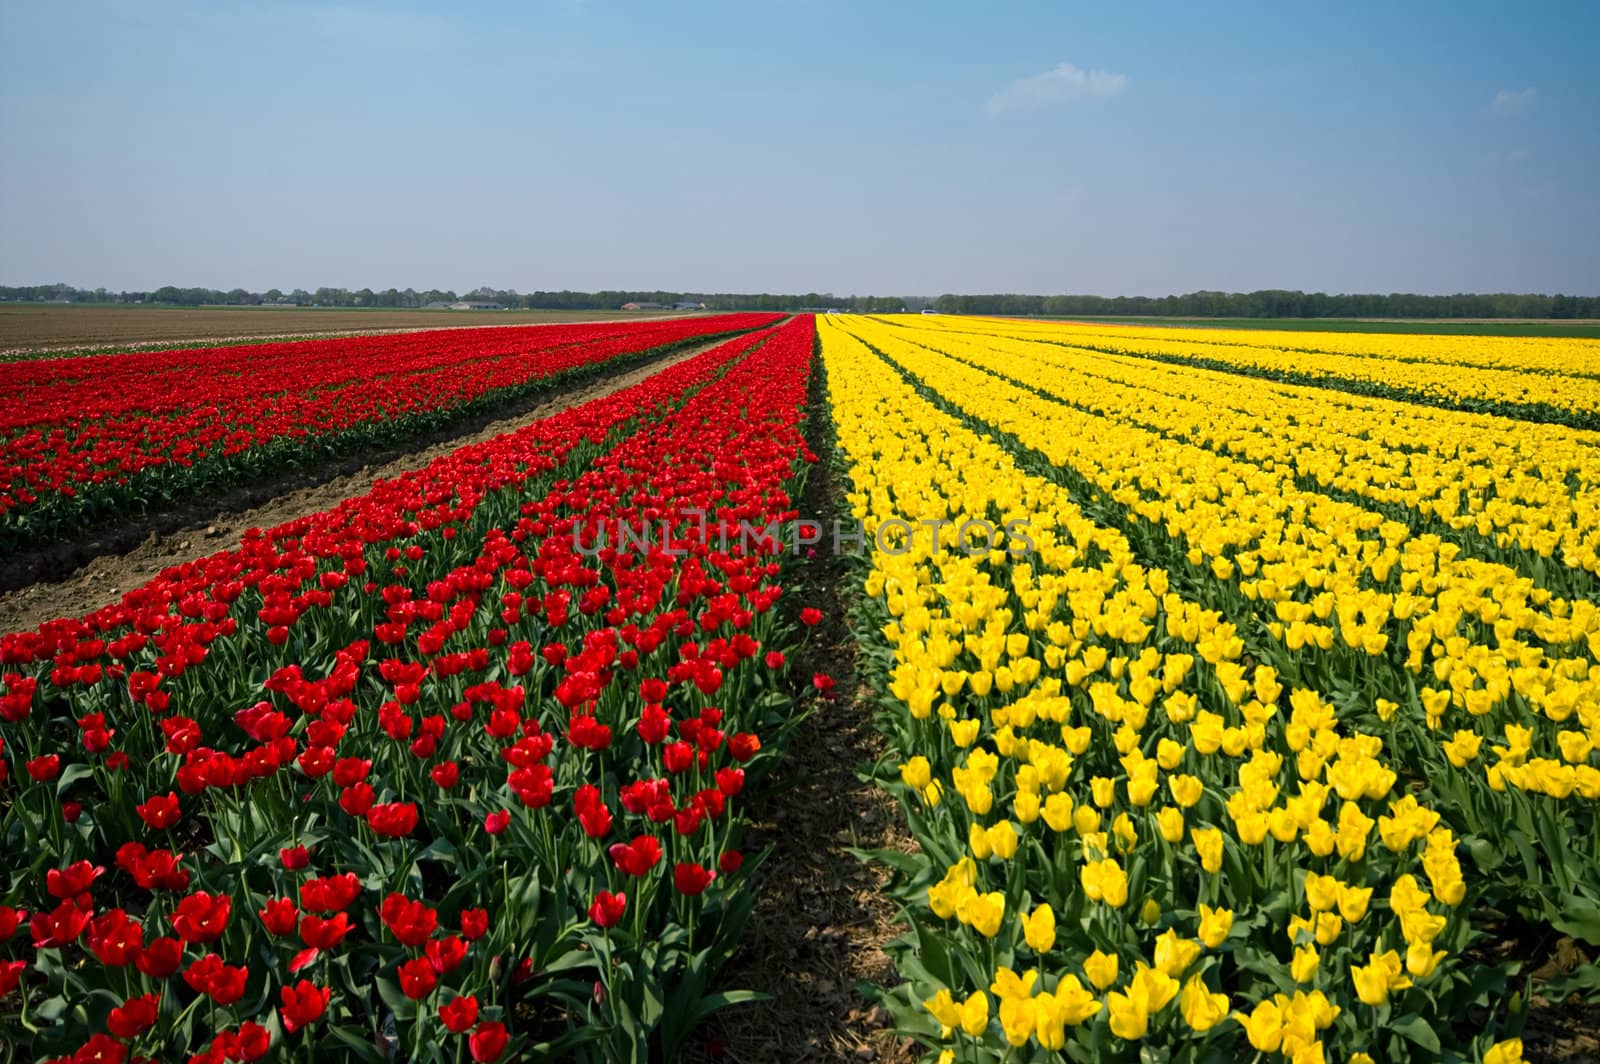 fields covered with tulips in yellow and red for bulb harvest
